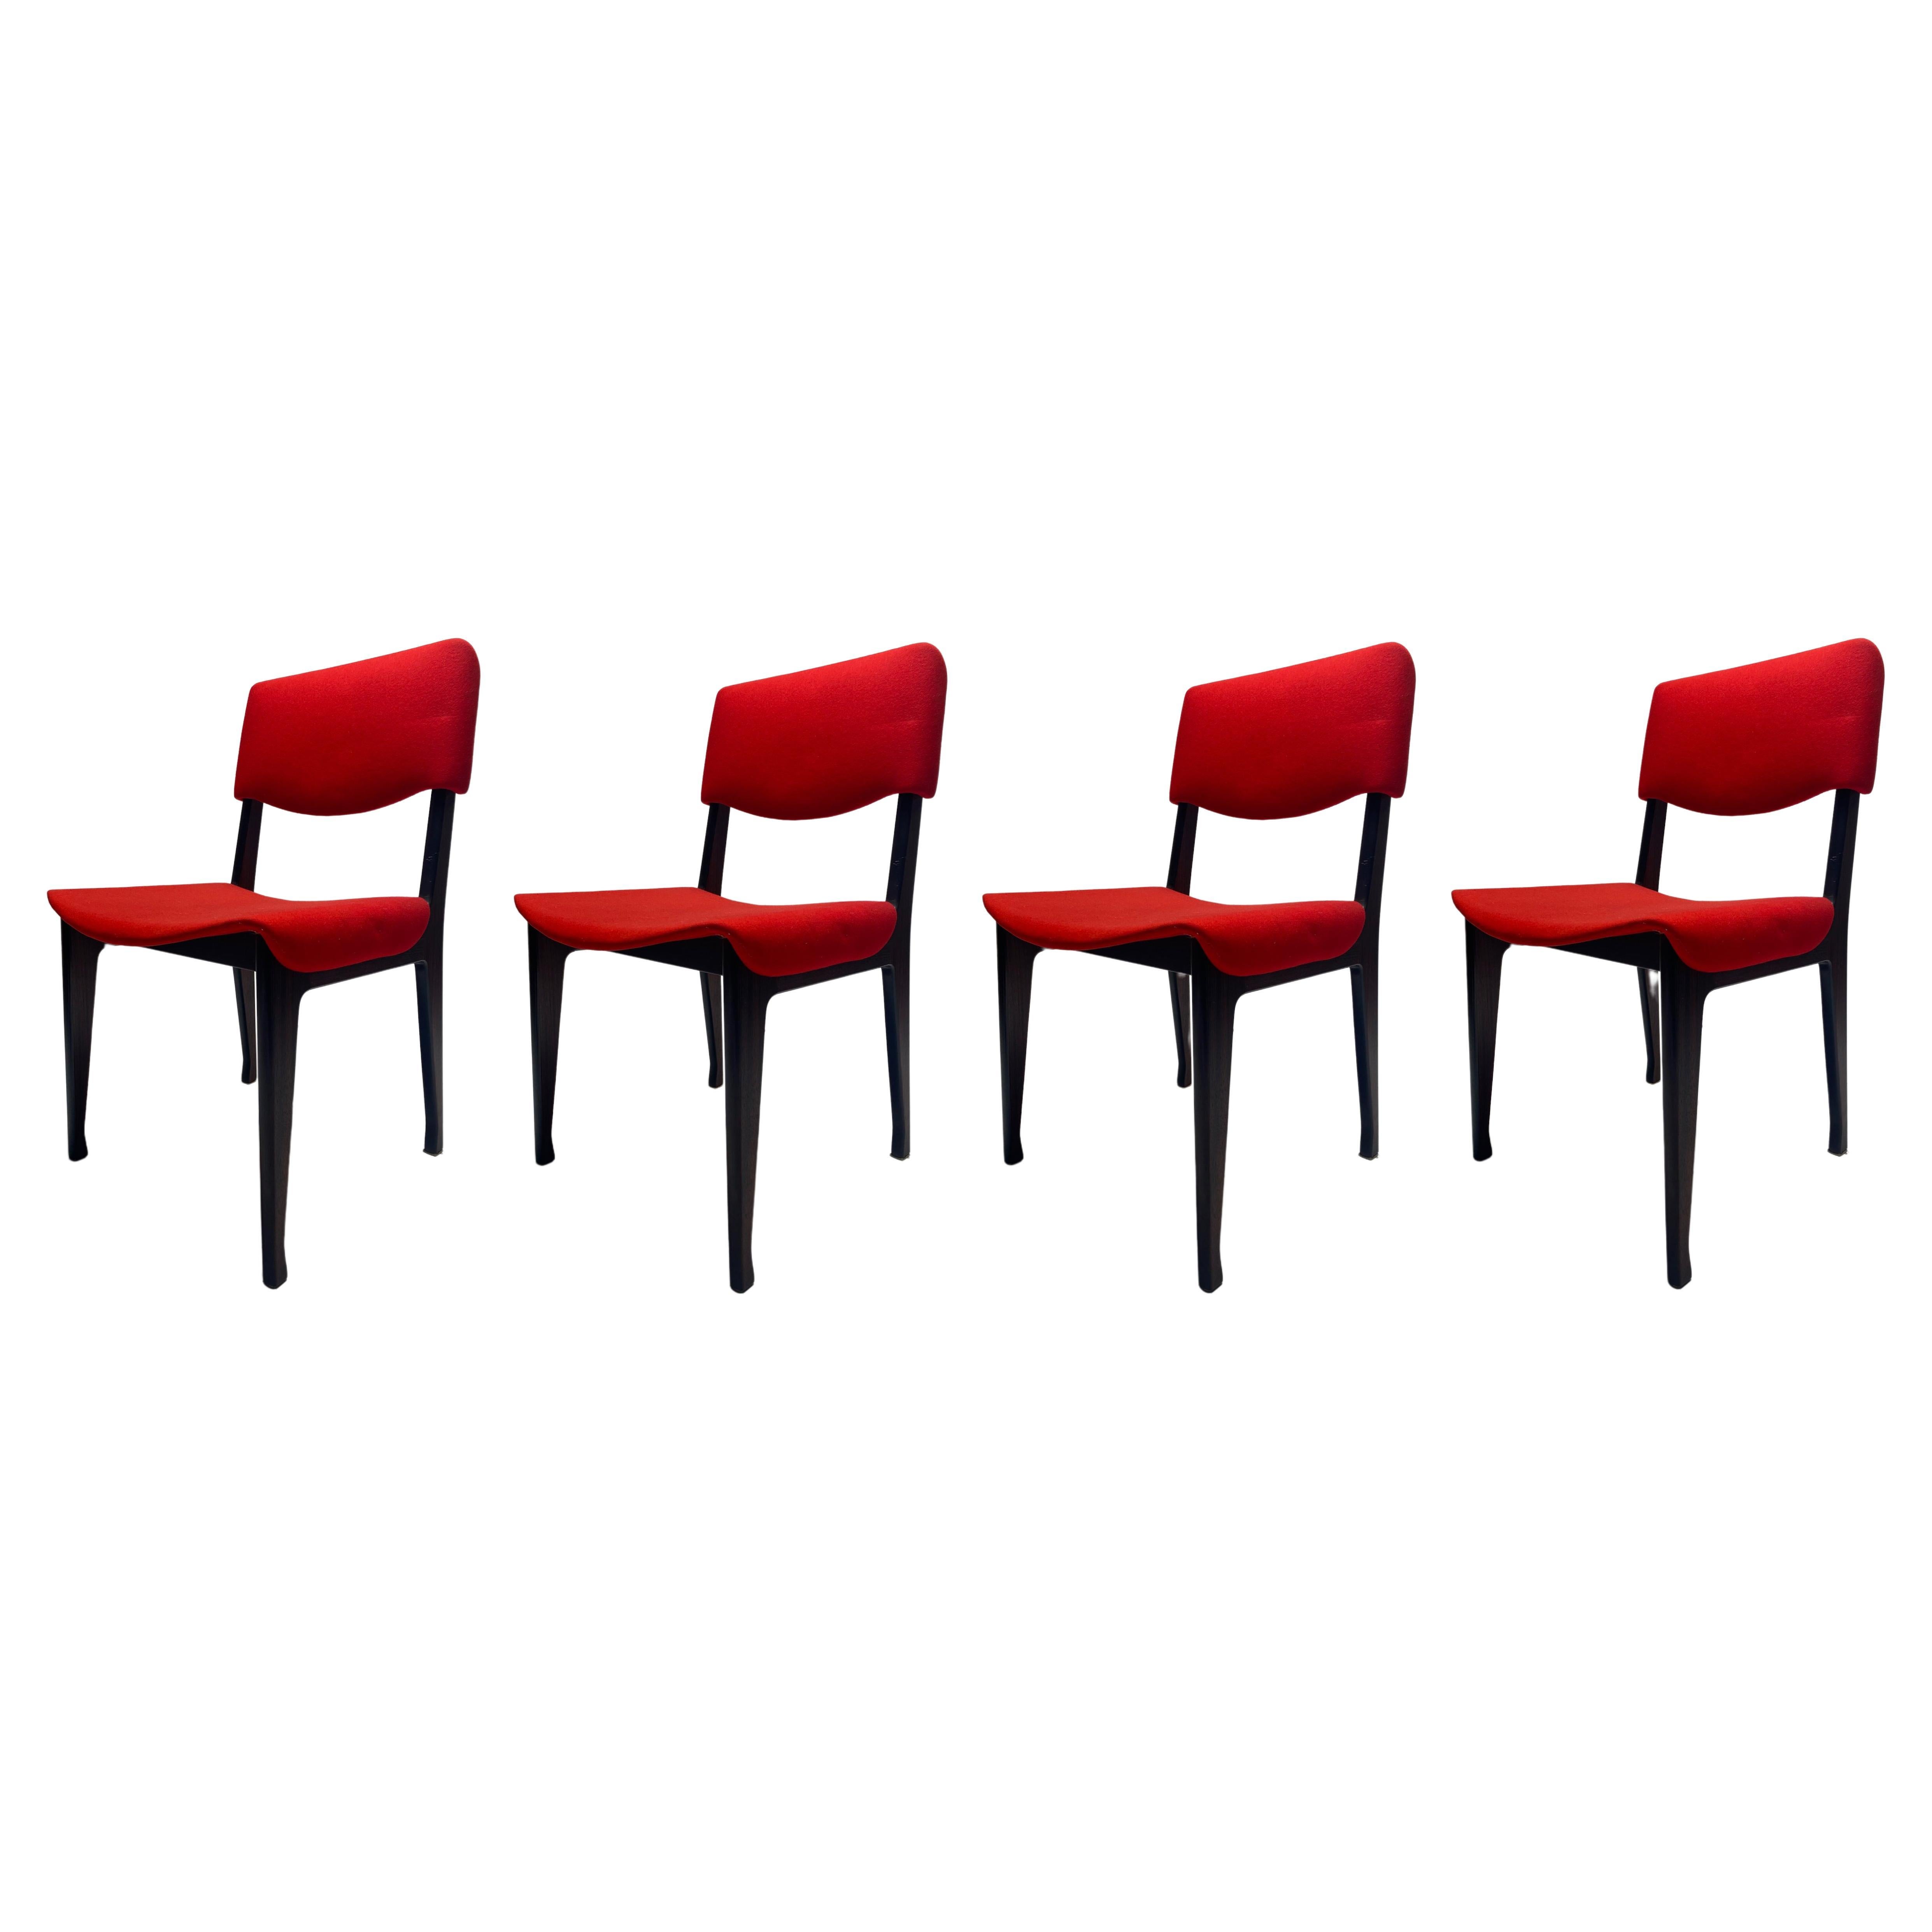 Set of four chairs by Ico Parisi for Mim, Italy, 1960s